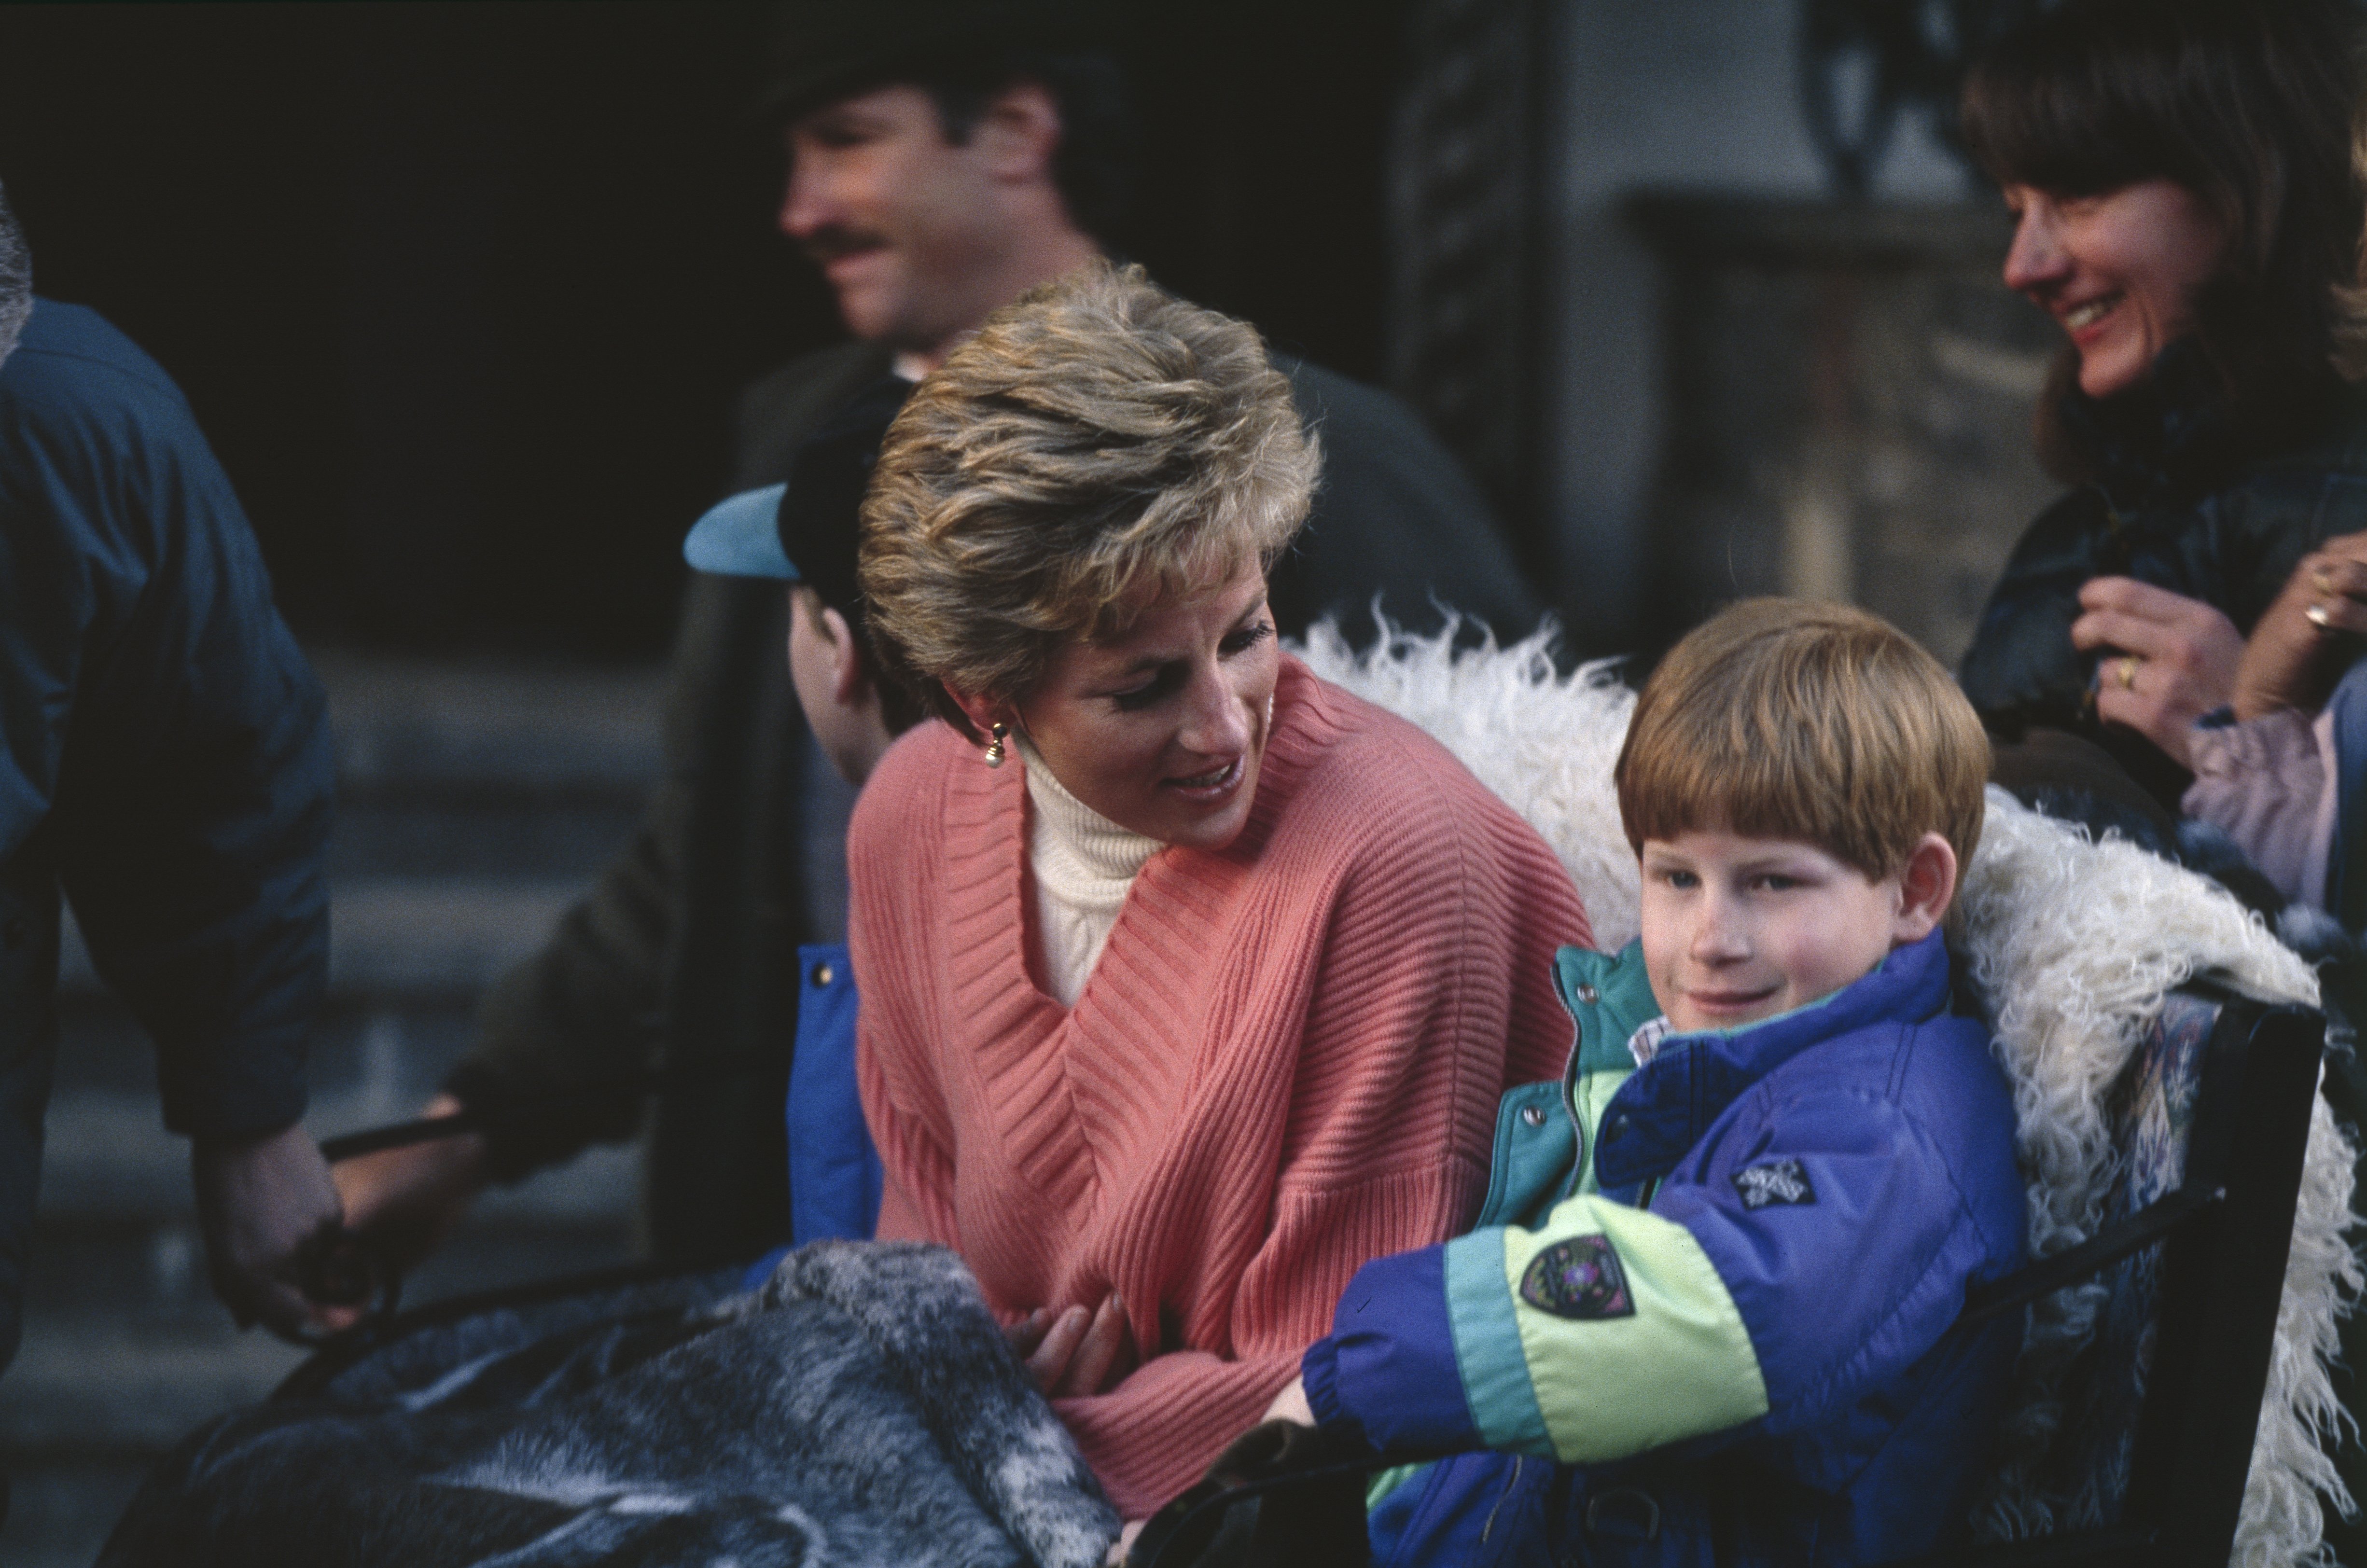 Princess Diana and her sons Prince Harry and Prince William during a holiday in the Austrian resort of Lech on March 24, 1994. / Source: Getty Images